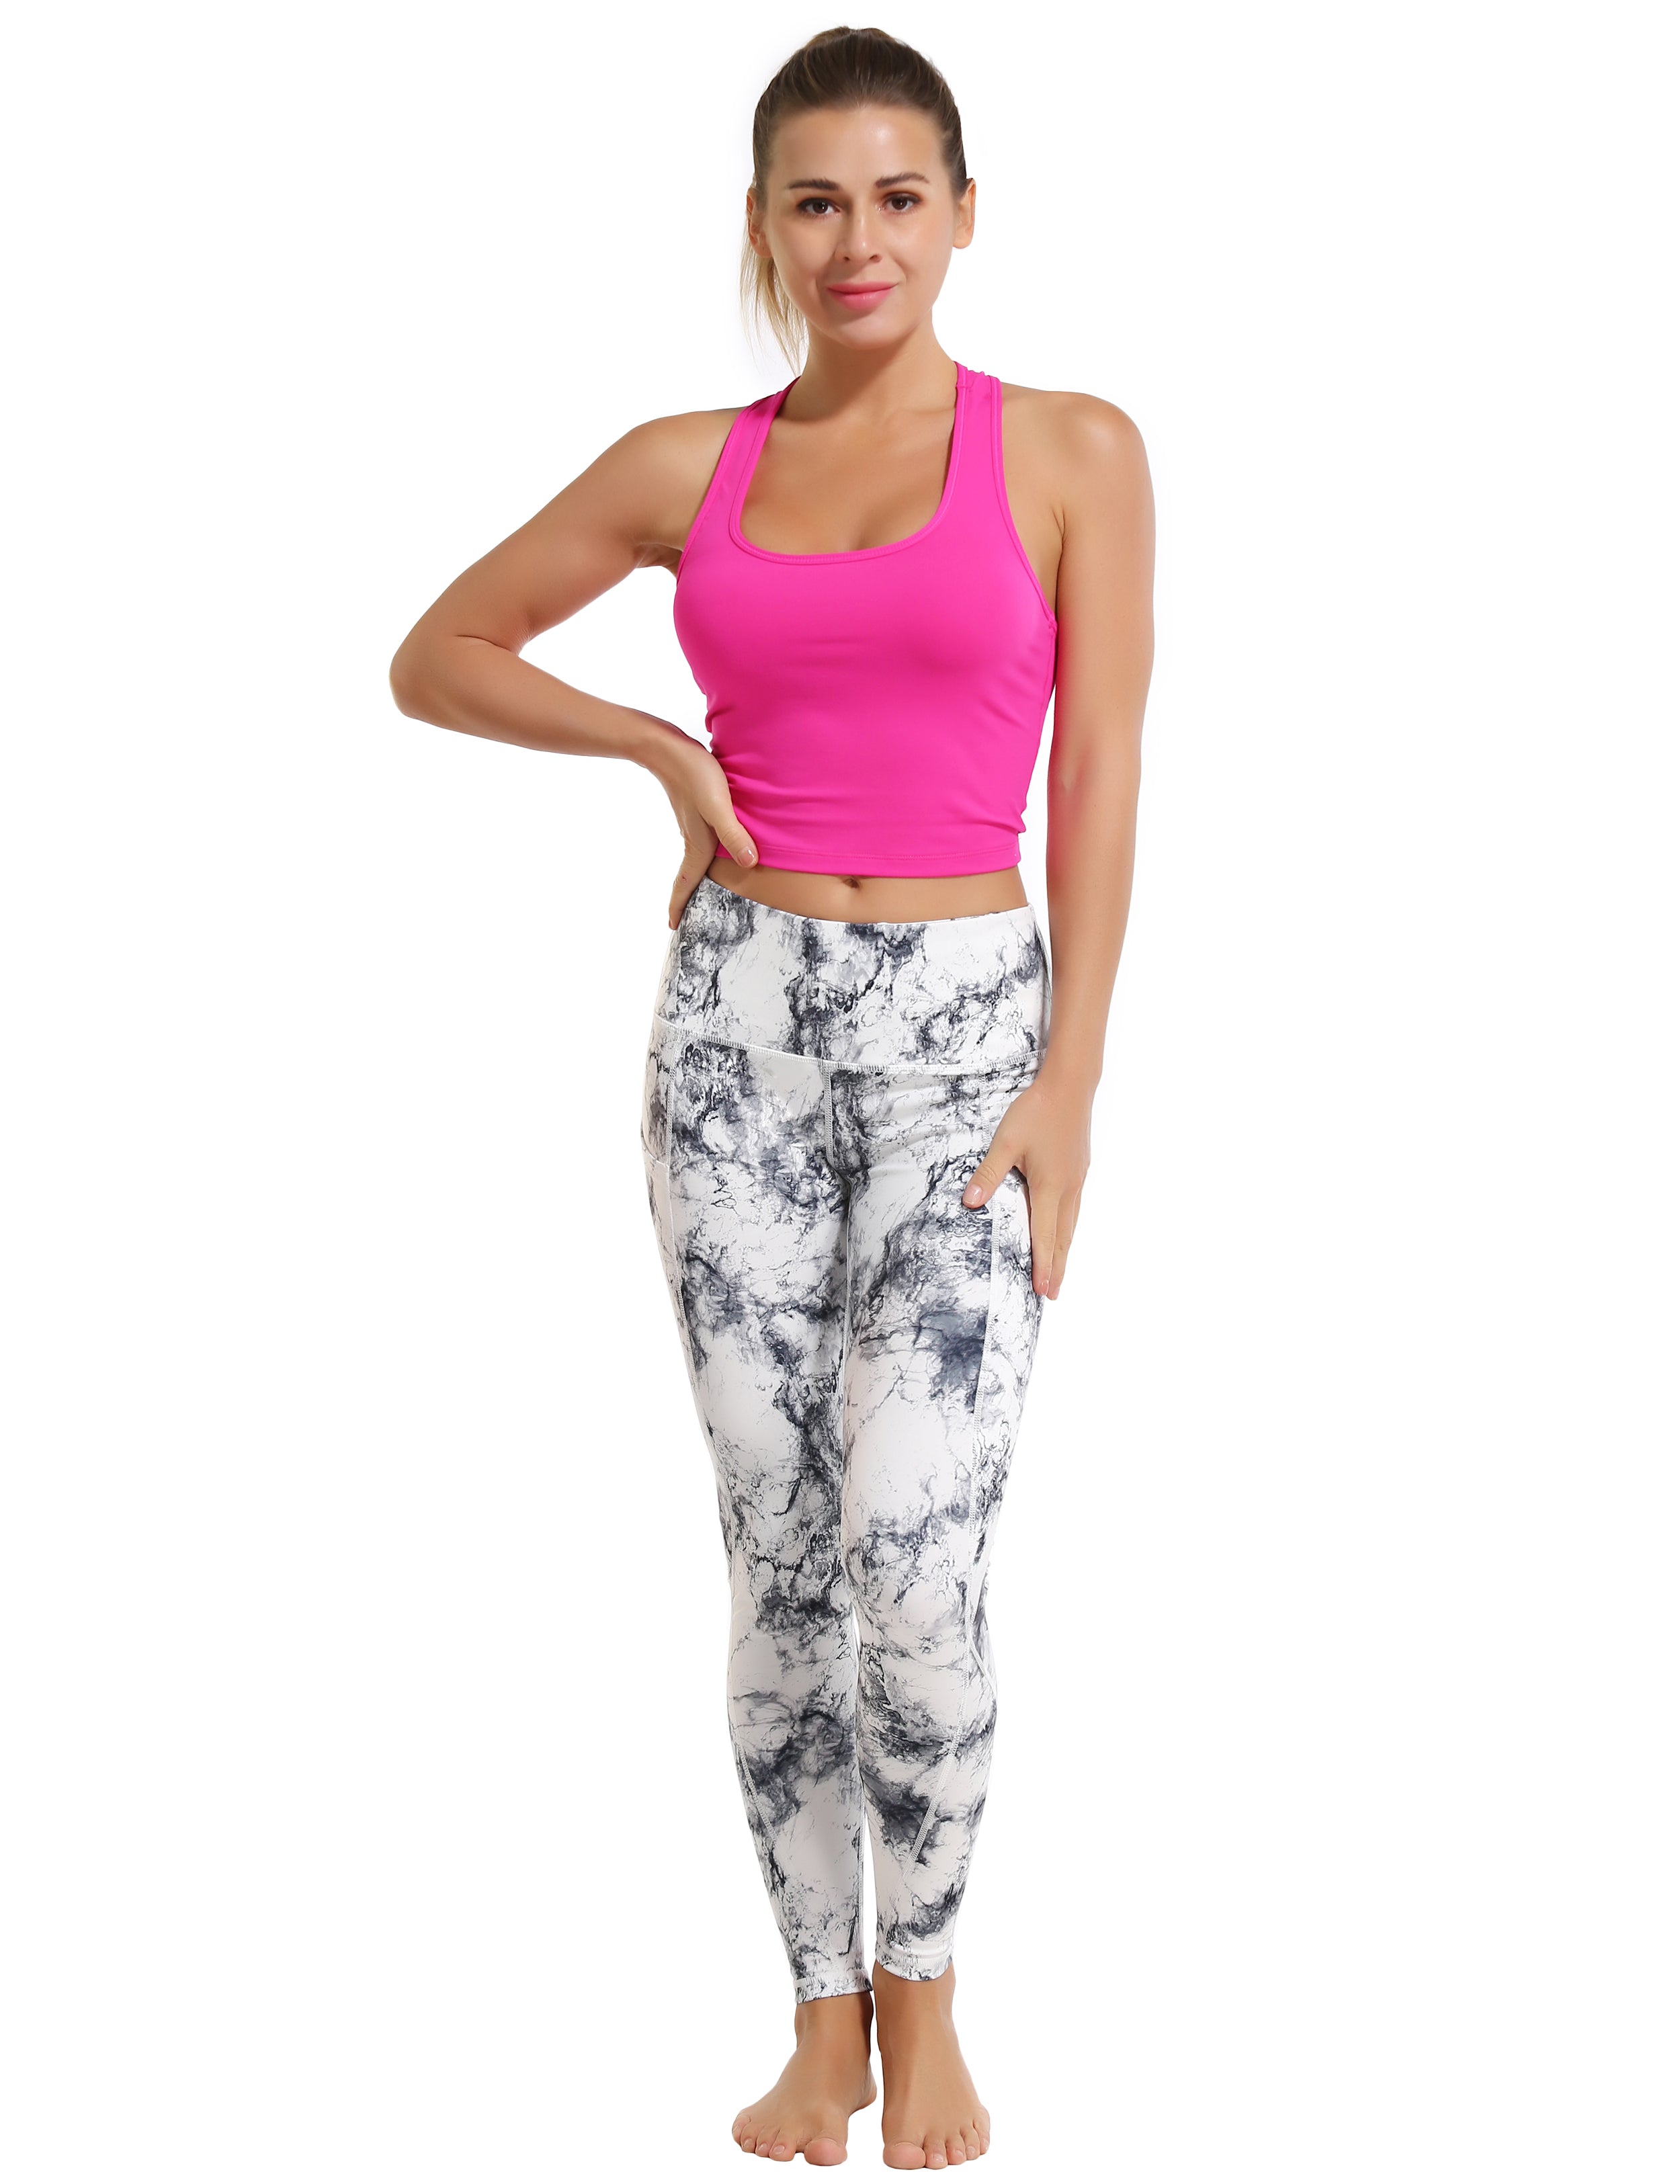 High Waist Side Pockets Gym Pants arabescato 78%Polyester/22%Spandex Fabric doesn't attract lint easily 4-way stretch No see-through Moisture-wicking Tummy control Inner pocket